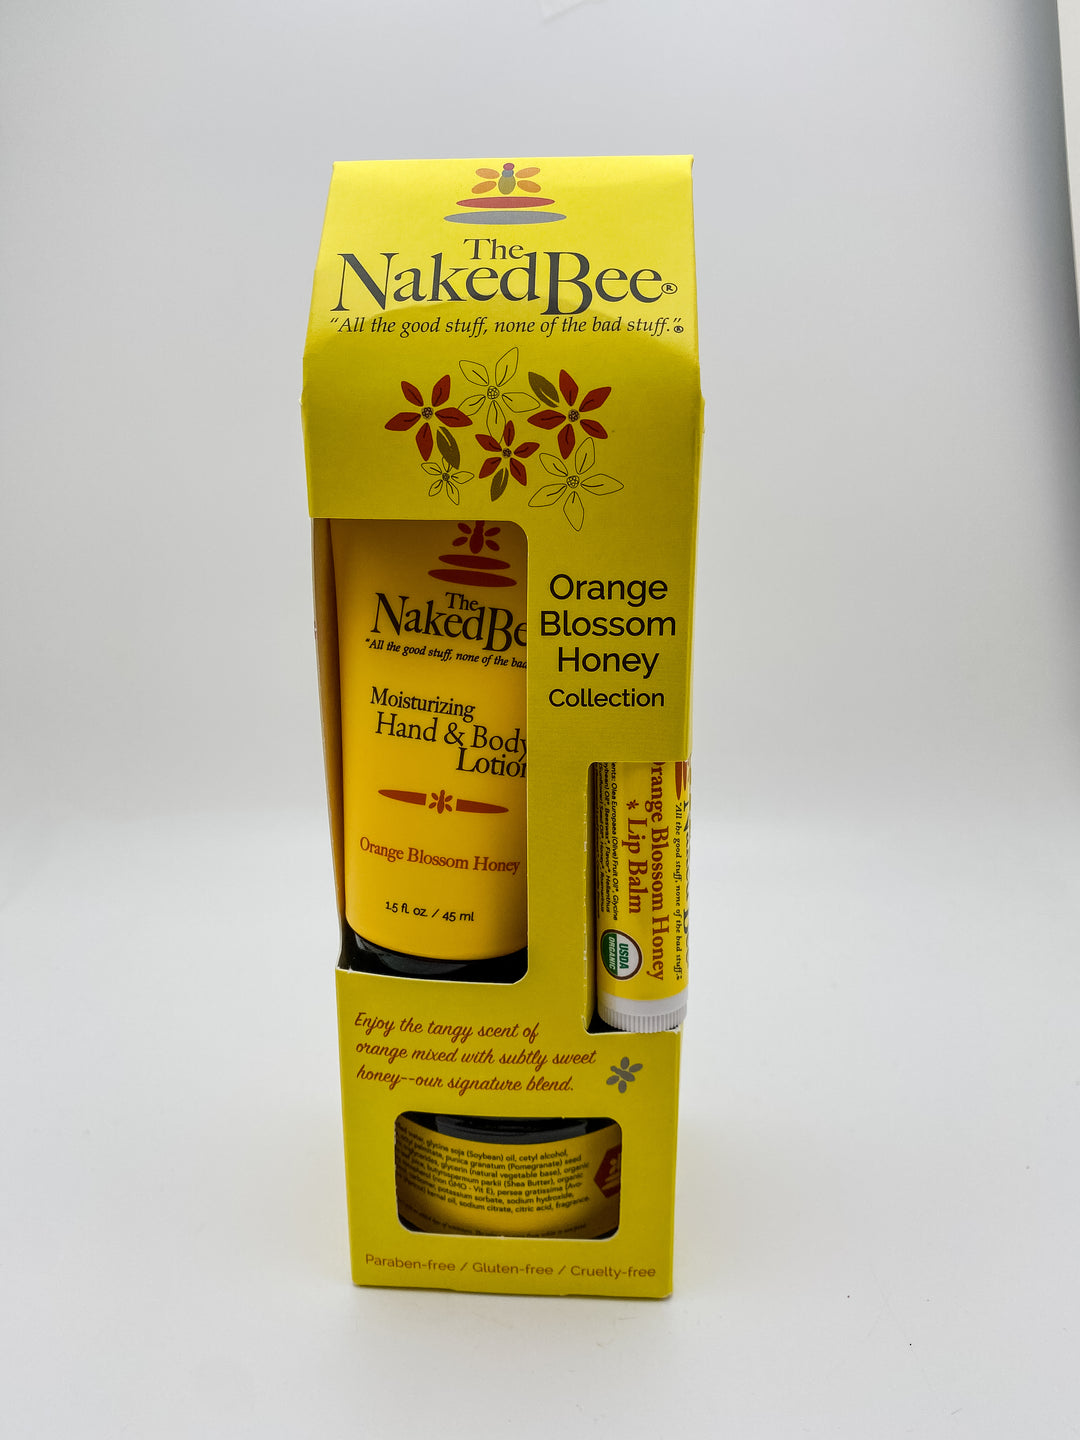 Orange Blossom Honey Gift Collection by The Naked Bee